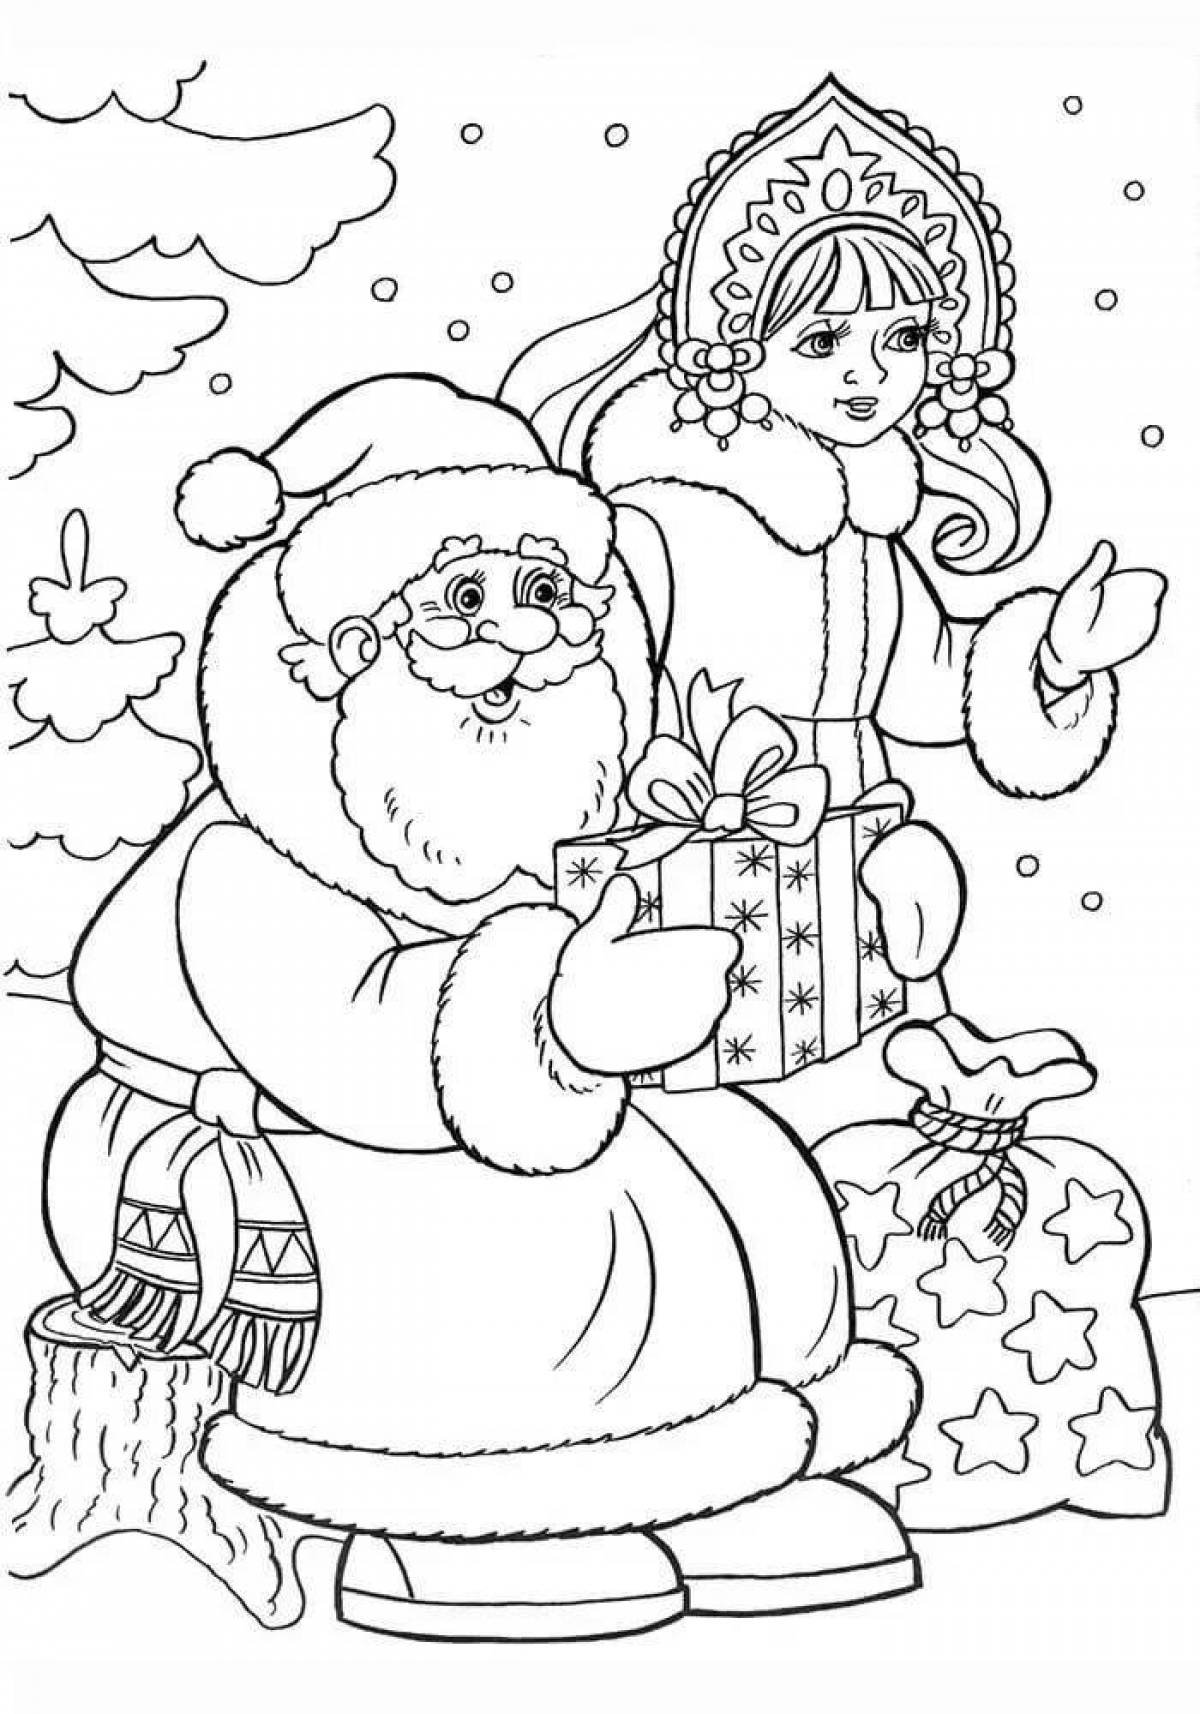 Santa Claus and Snow Maiden pictures #2